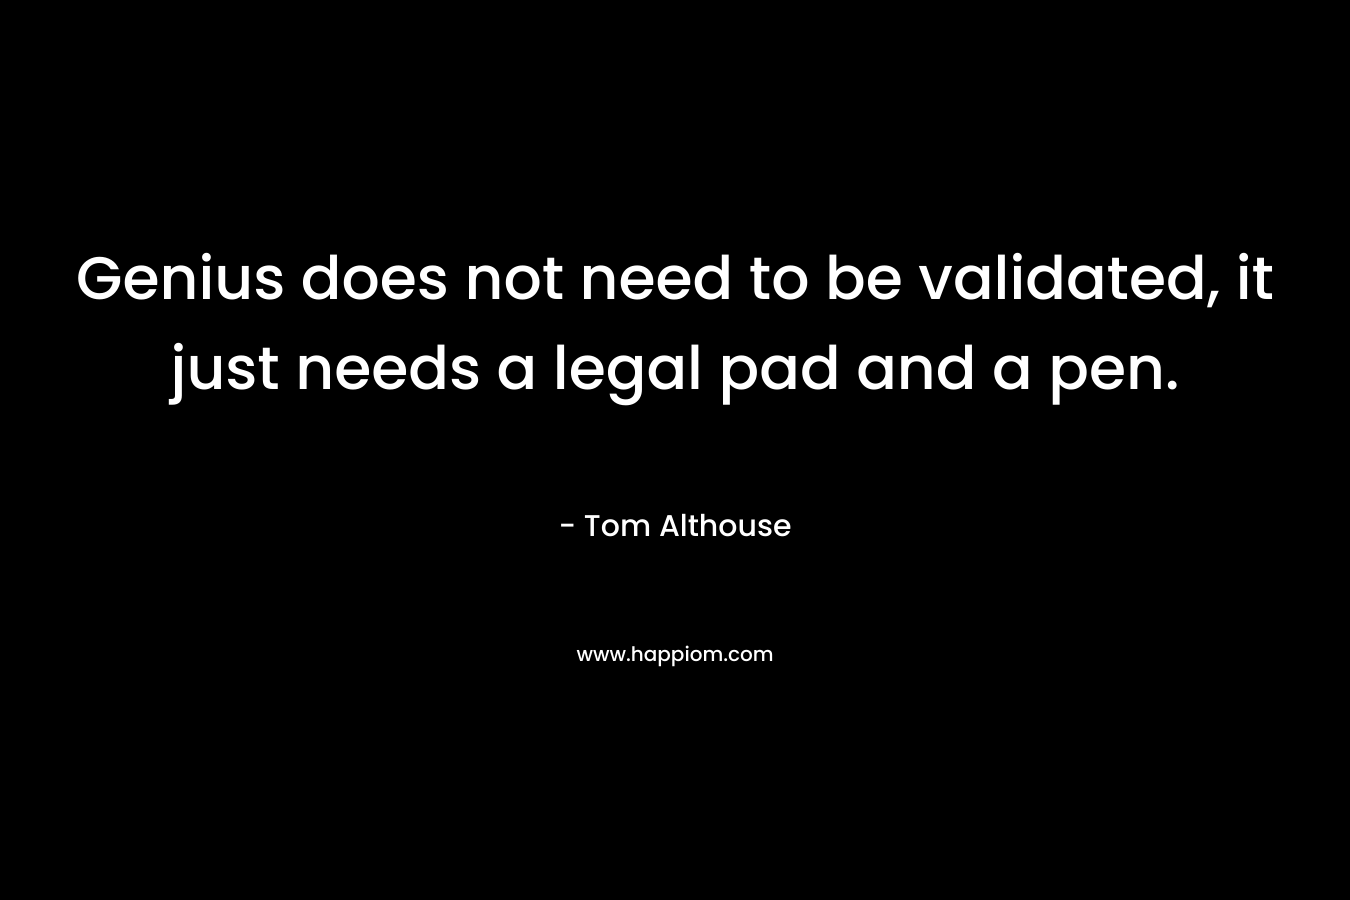 Genius does not need to be validated, it just needs a legal pad and a pen. – Tom Althouse